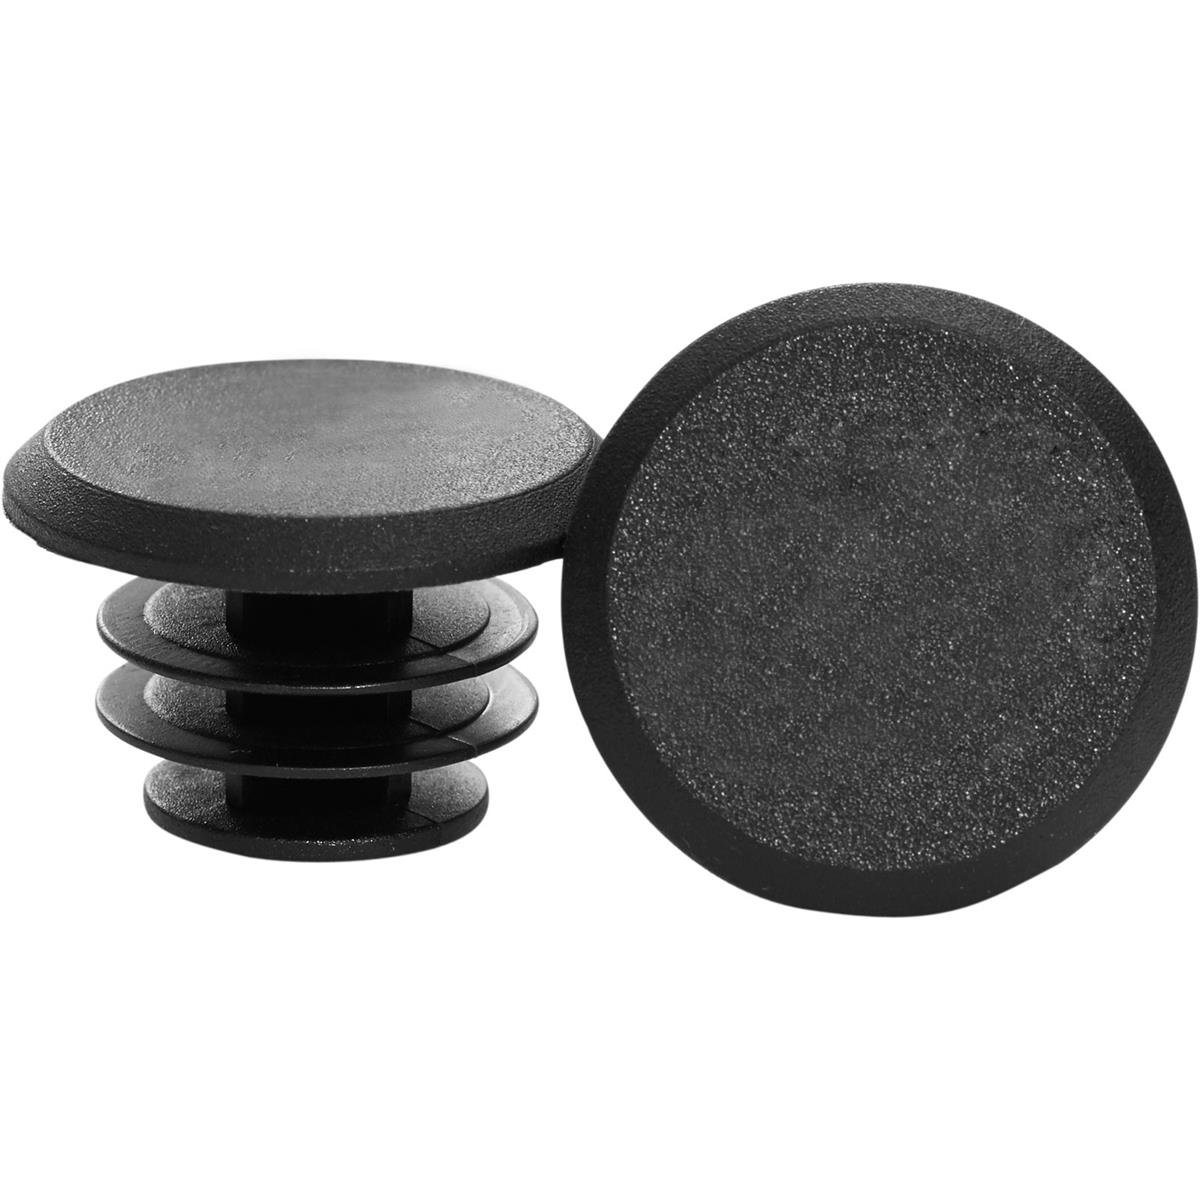 Reverse Components End Plugs for Lock-On Grips  Black, 2 pieces